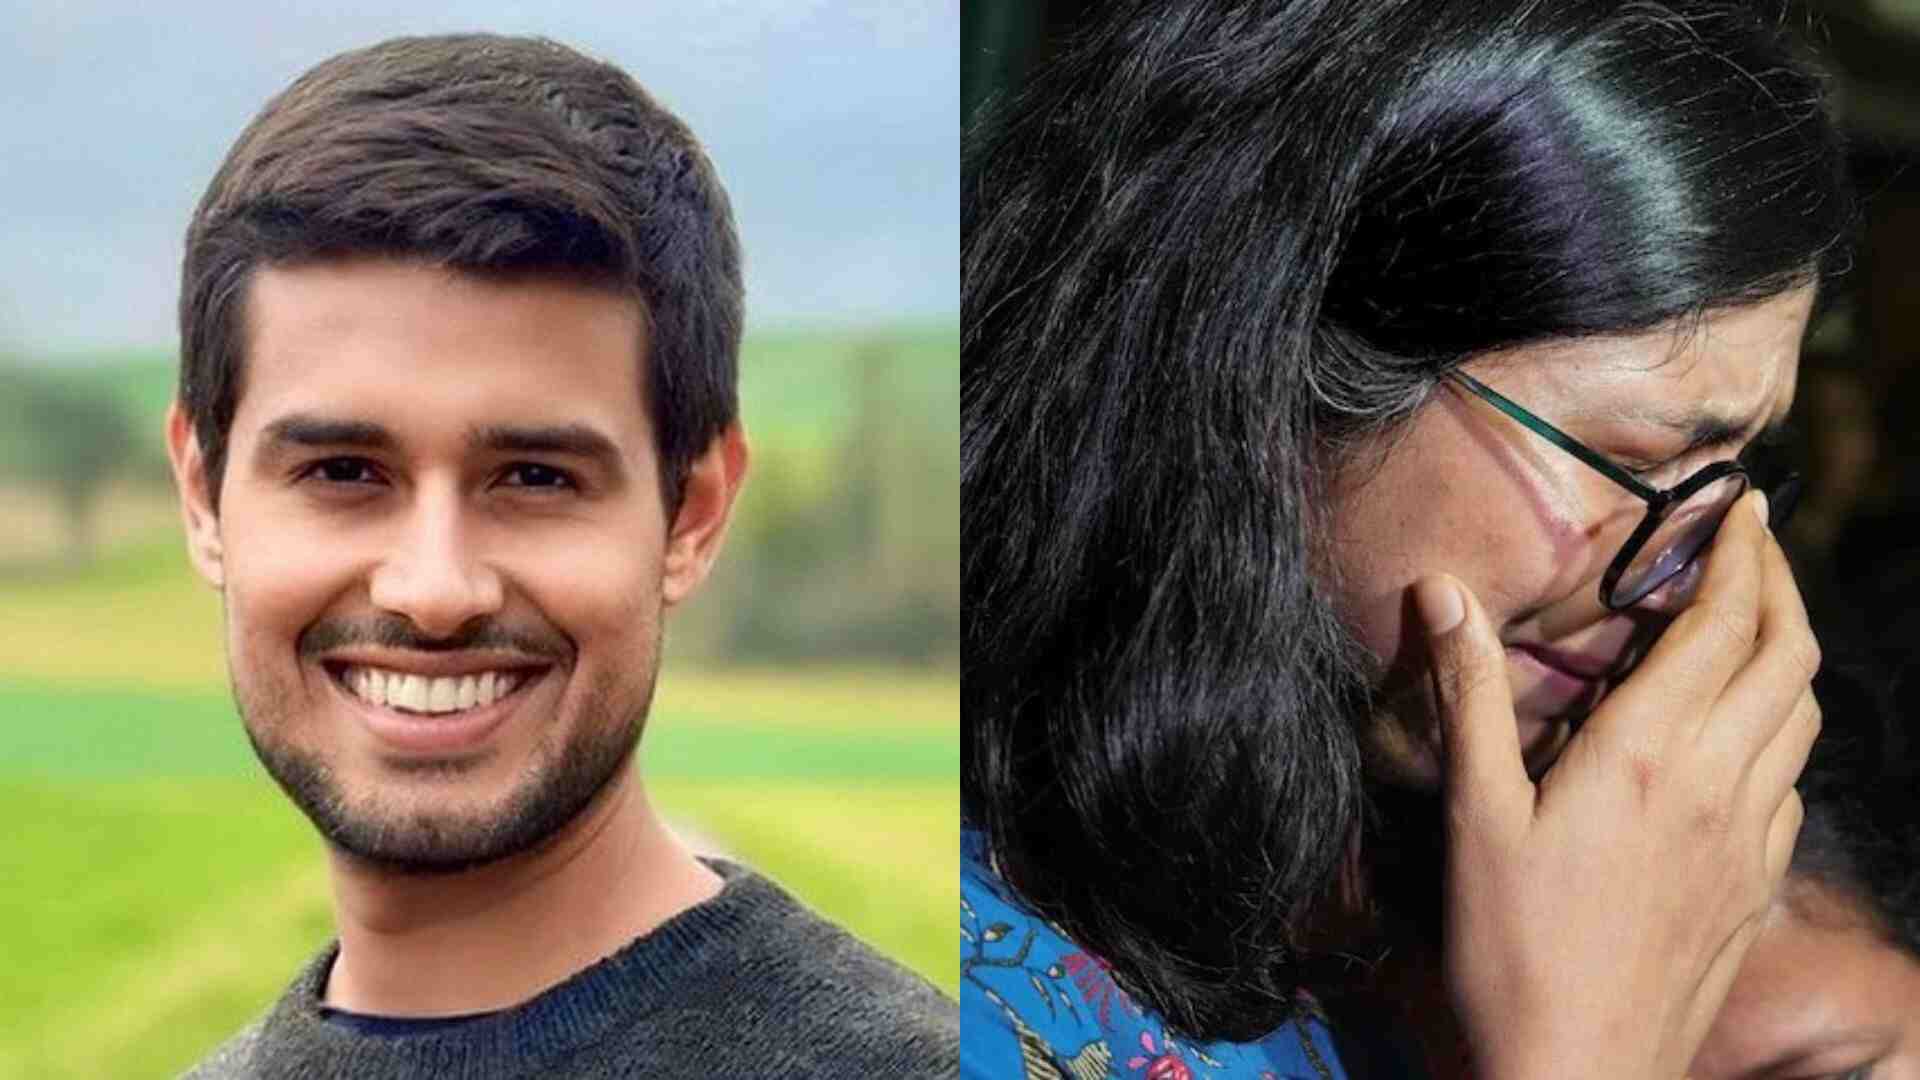 YouTuber Dhruv Rathee Responds to Swati Maliwal's Allegations